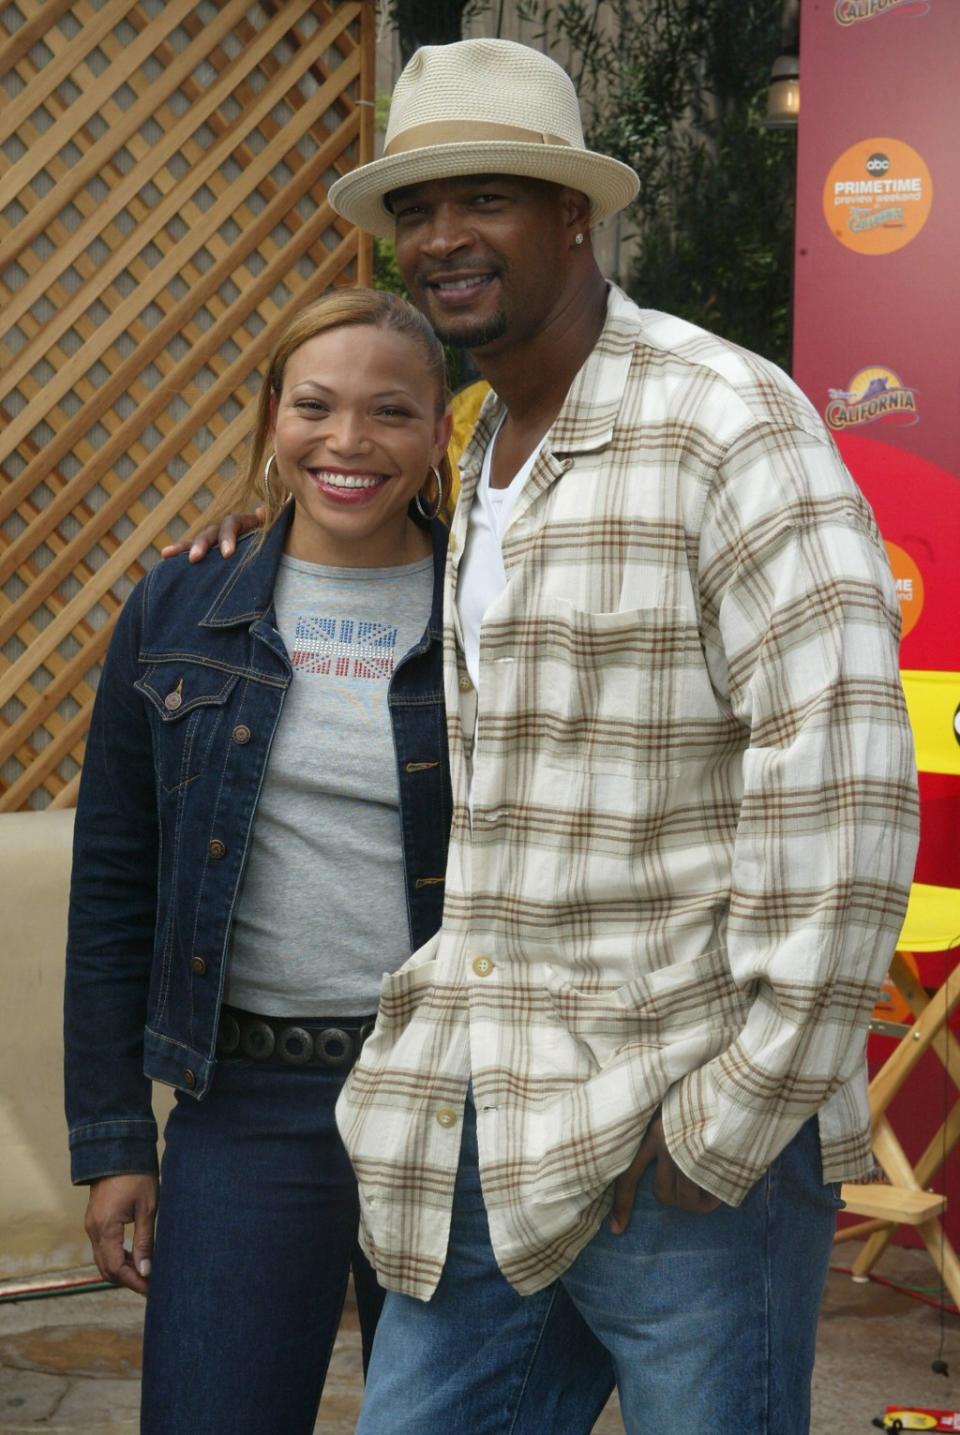 Tisha Campbell and Damon Wayans of the ABC sitcom “My Wife and Kids” attend the ABC Primetime Preview Weekend on Aug. 25, 2002, at Disney’s California Park in Anaheim, California. (Photo by Frazer Harrison/Getty Images)